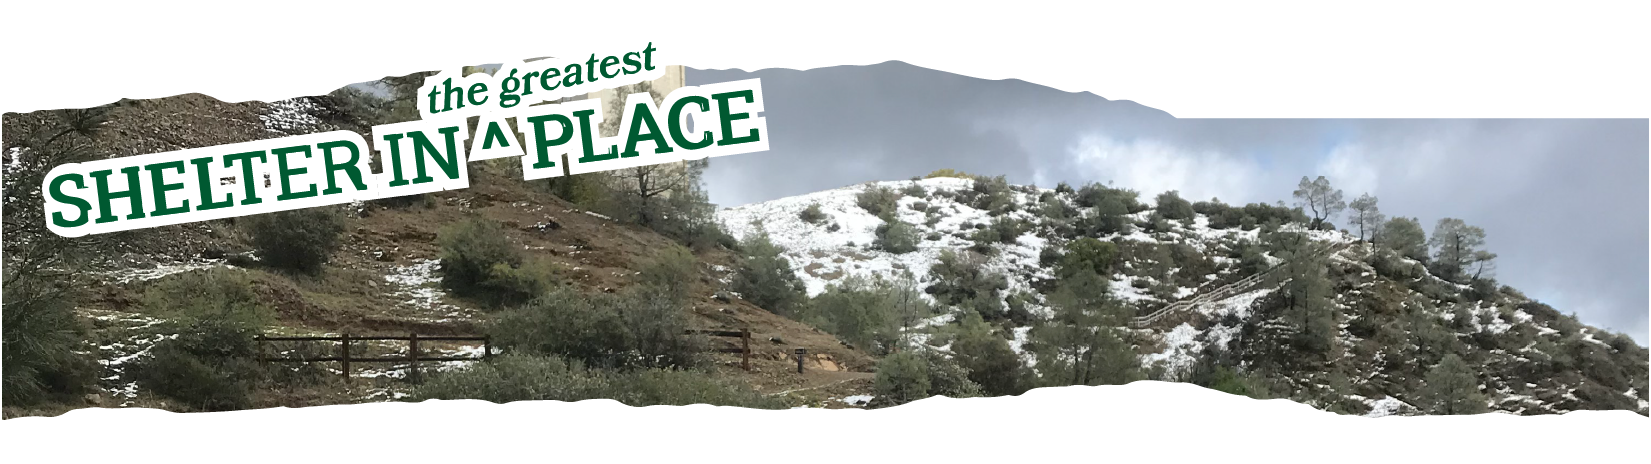 Title: Shelter in the Greatest Place overlaid on a photo of the snowy summit of Mount Umunhum